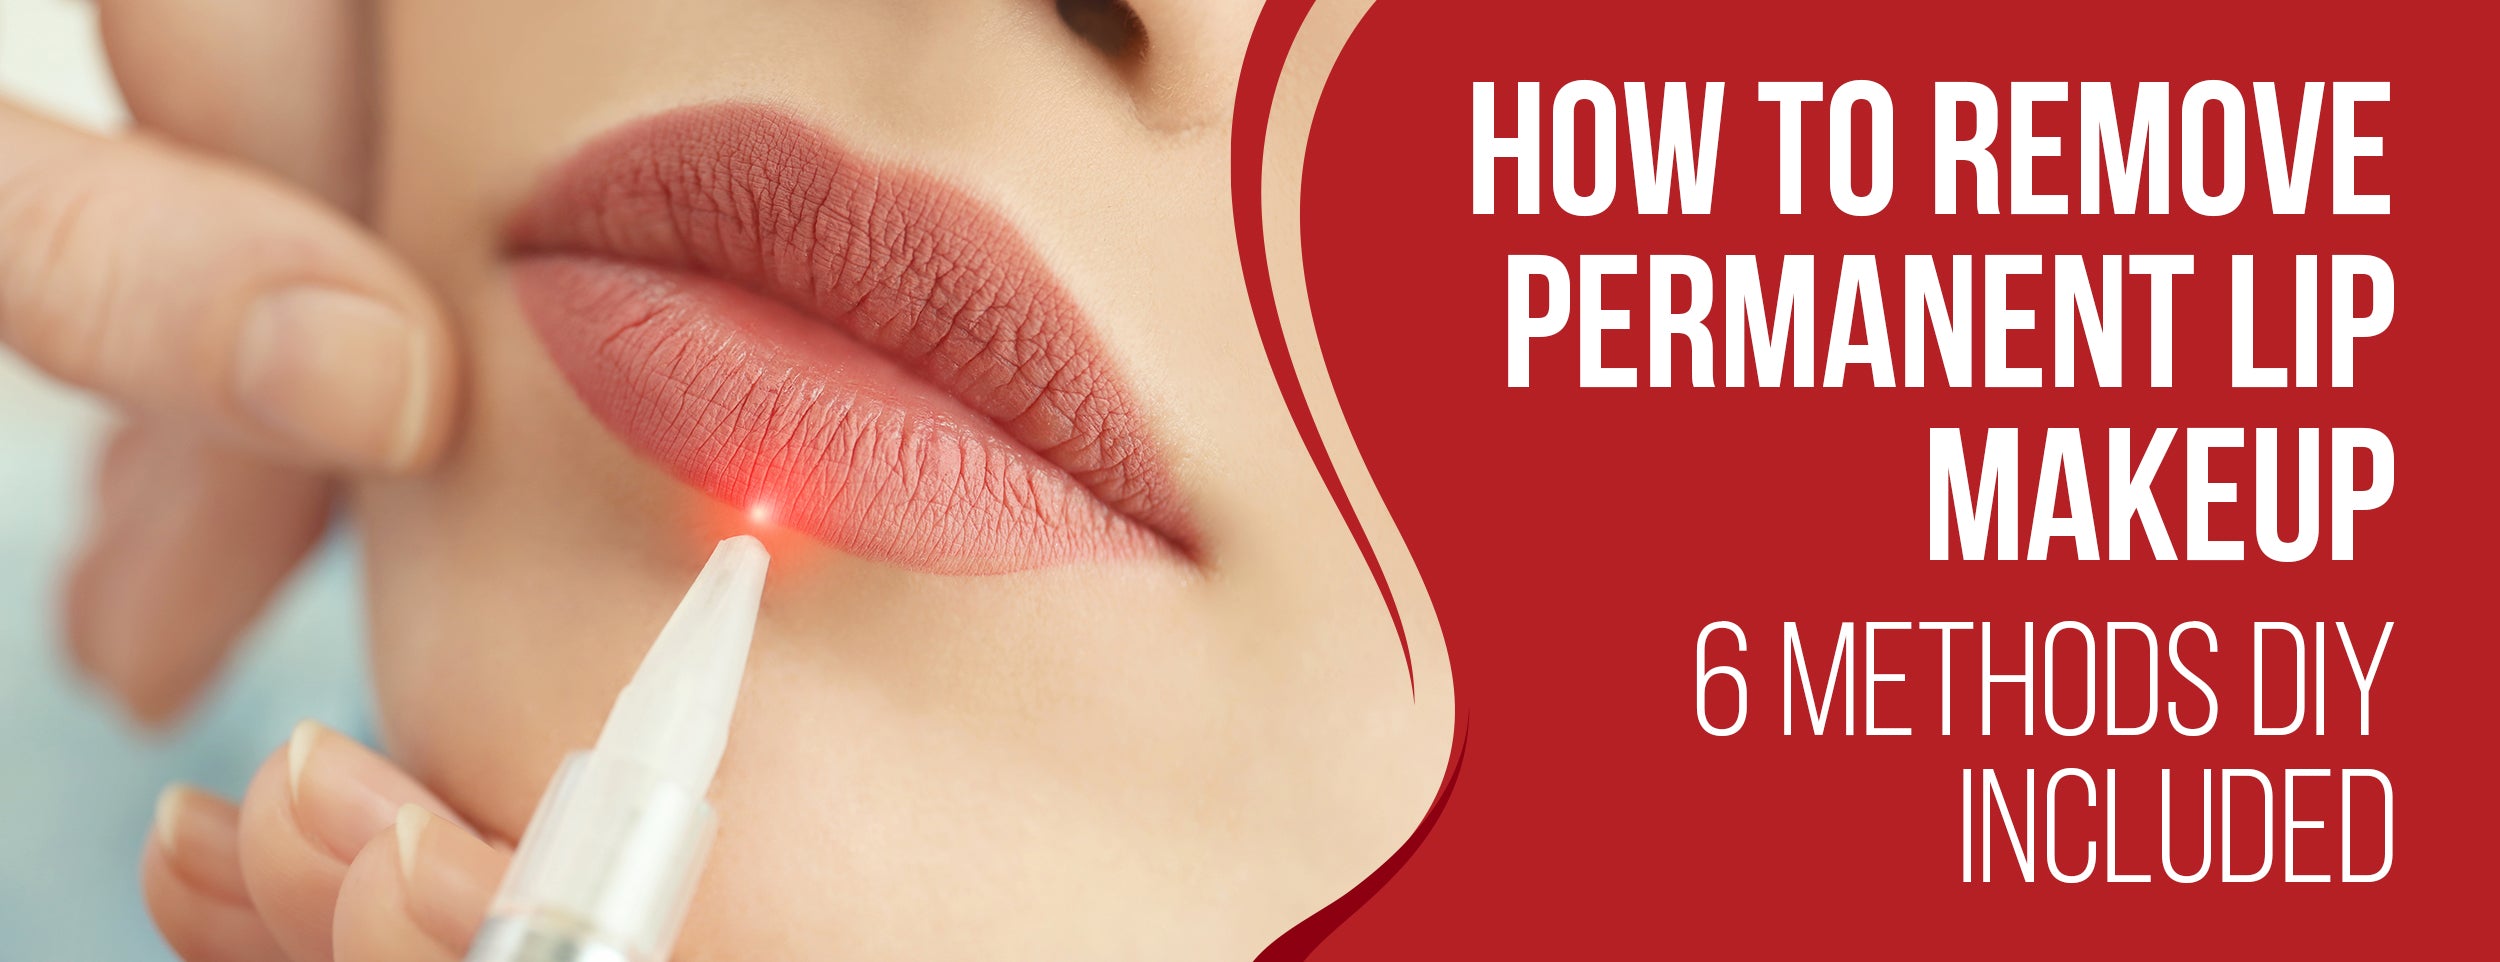 How to Remove Permanent Lip Makeup: 6 Methods [DIY Included]